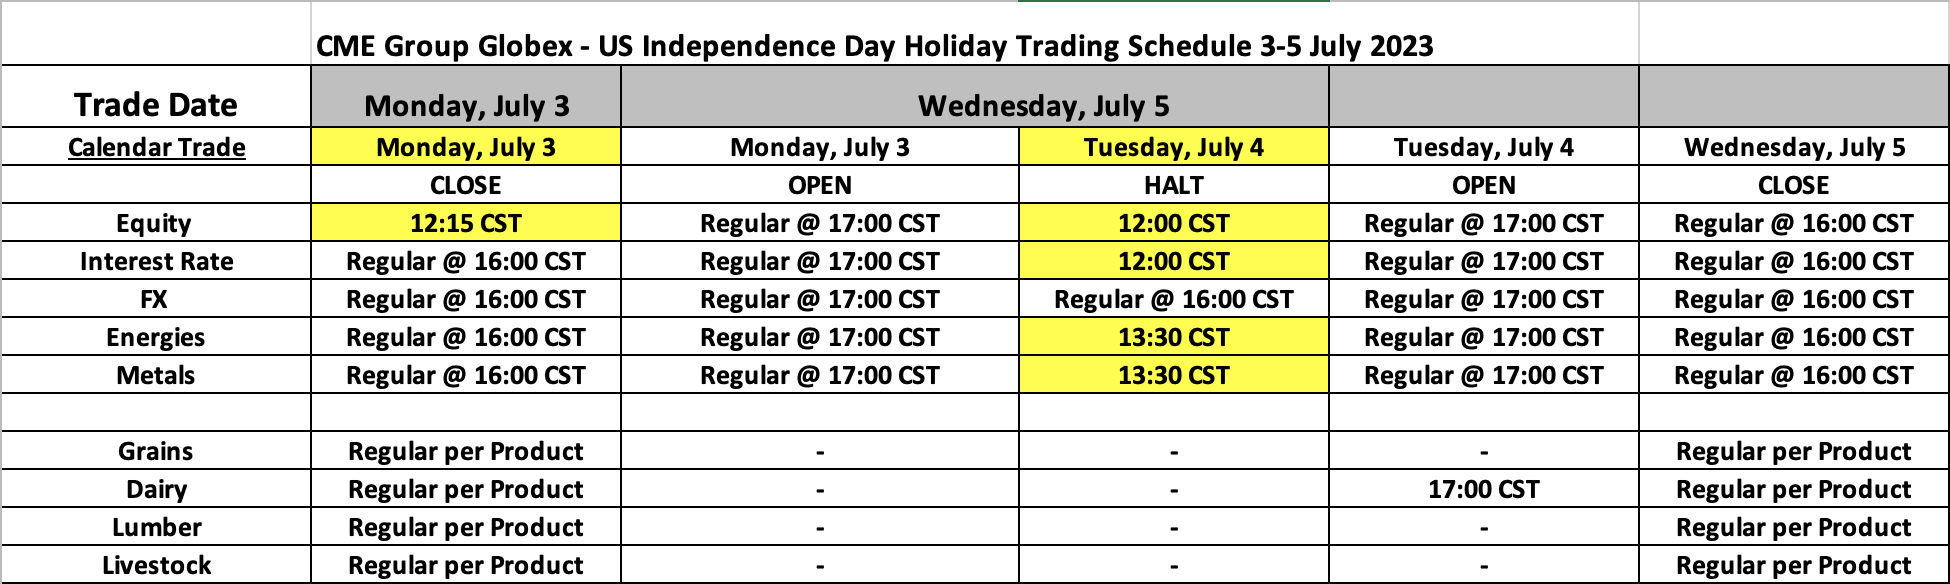 US Independence Day Holiday Trading Schedule - 2023